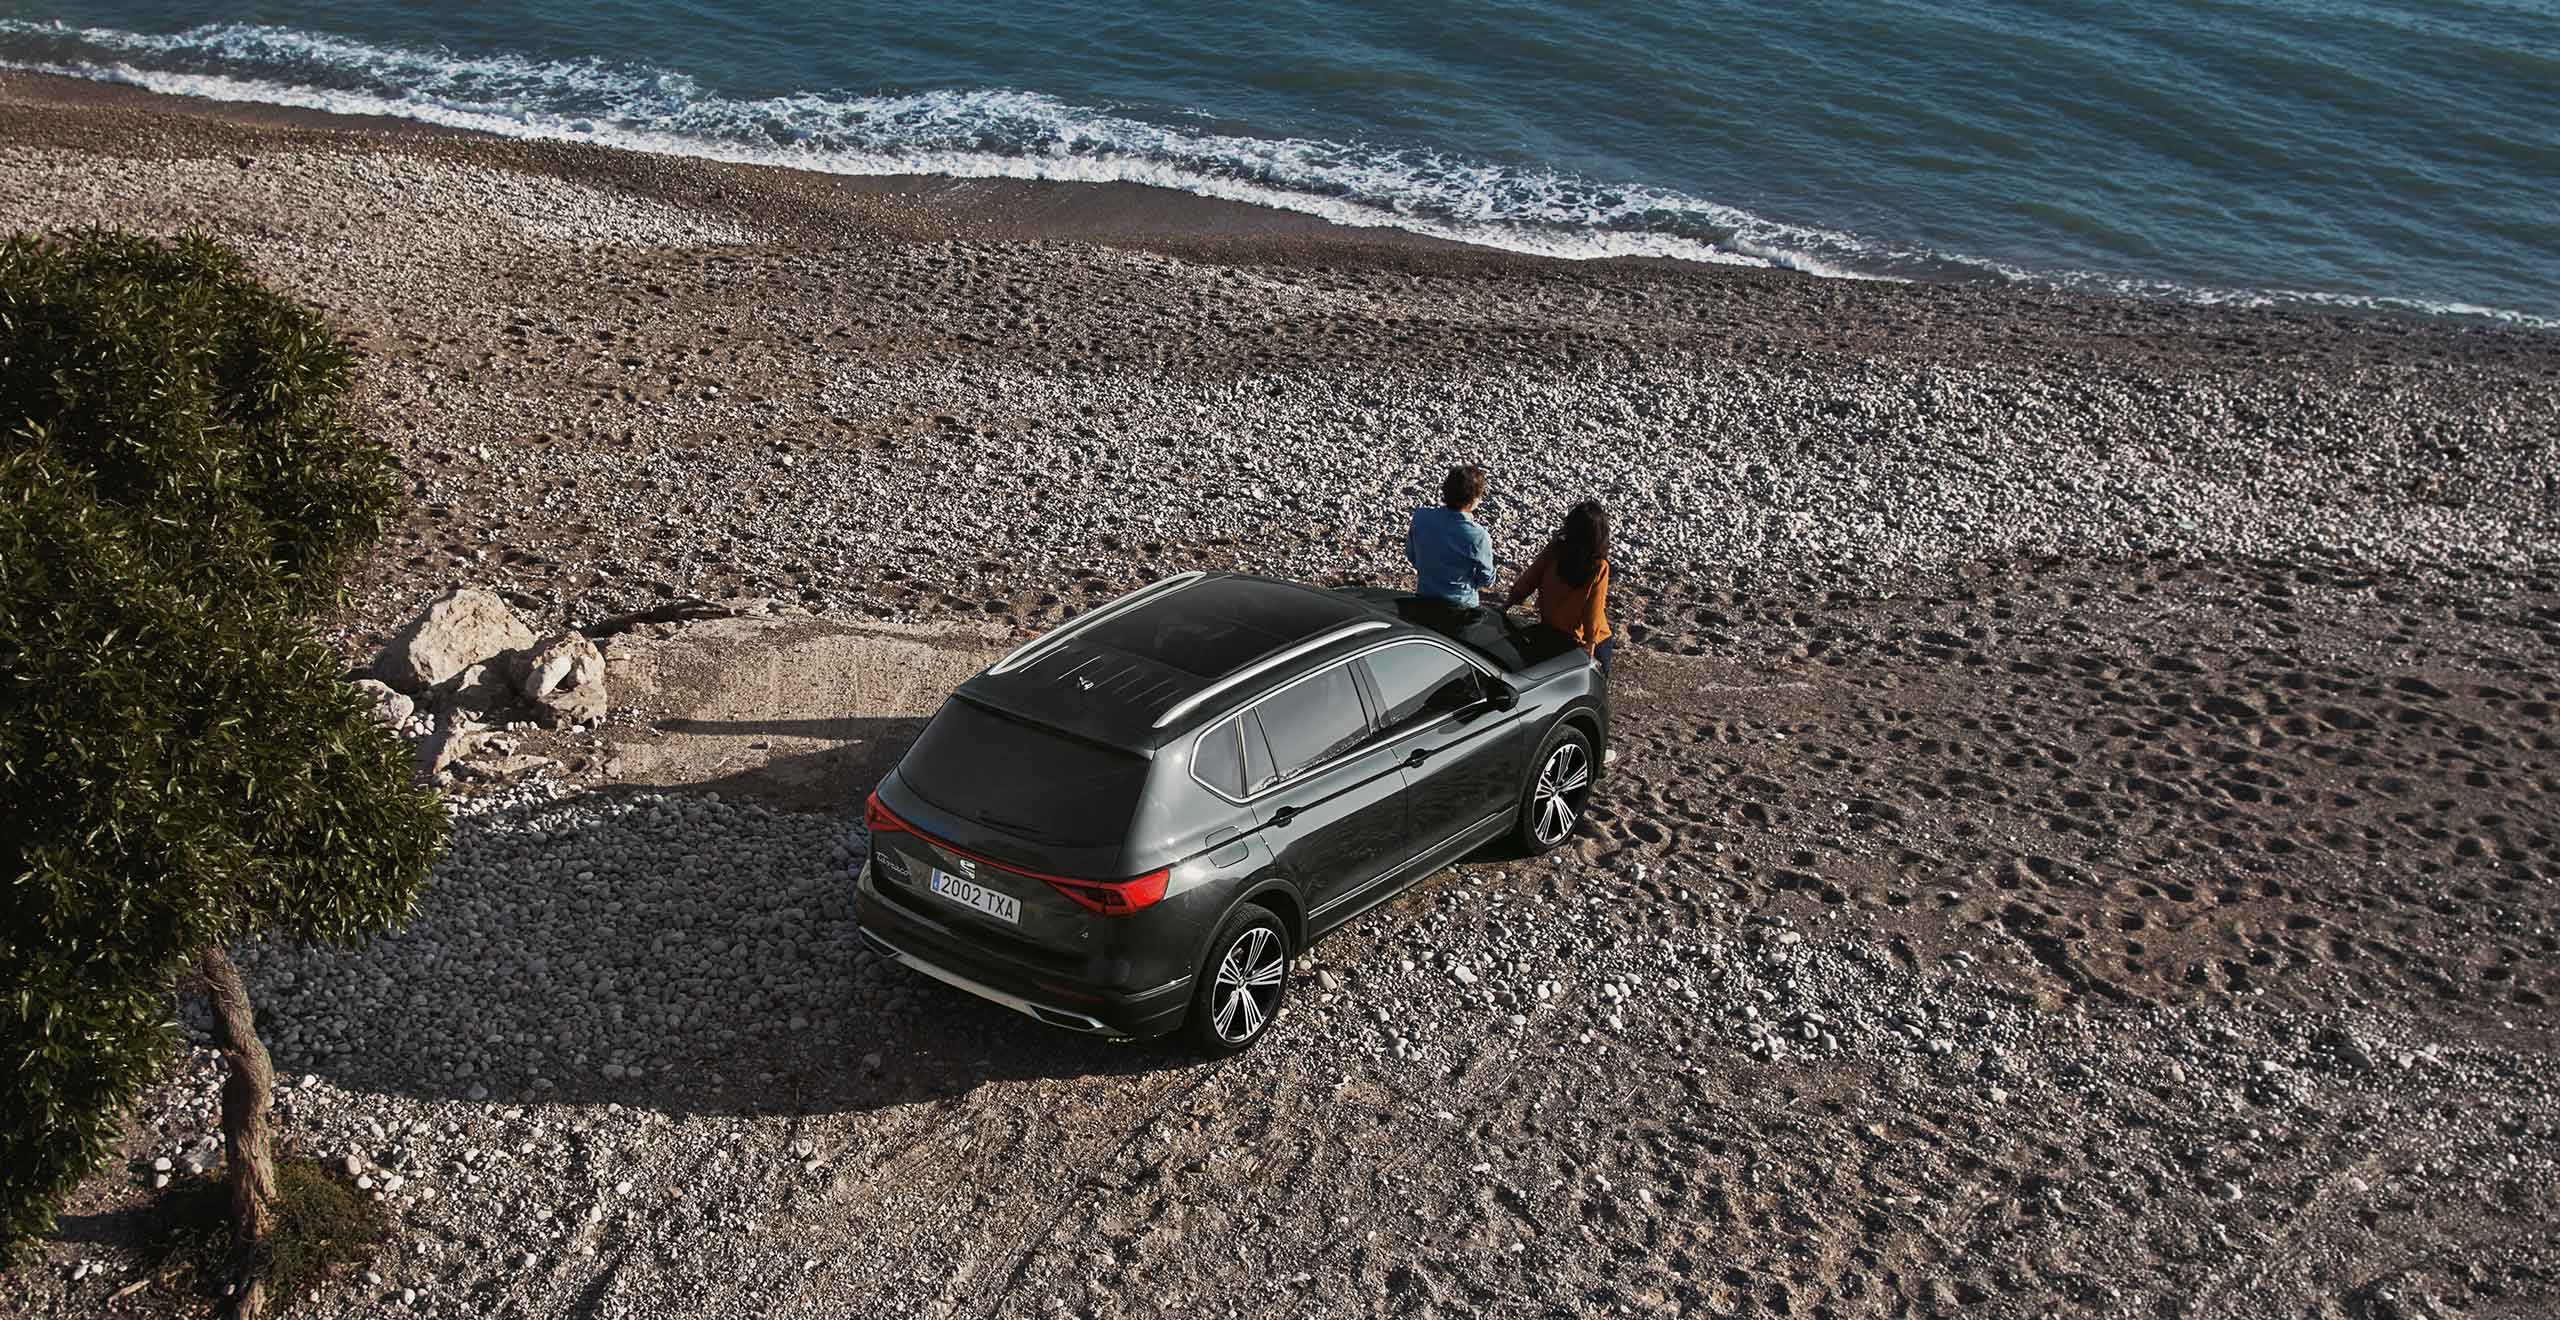 New SEAT Tarraco dark camouflage colour parked at the beach